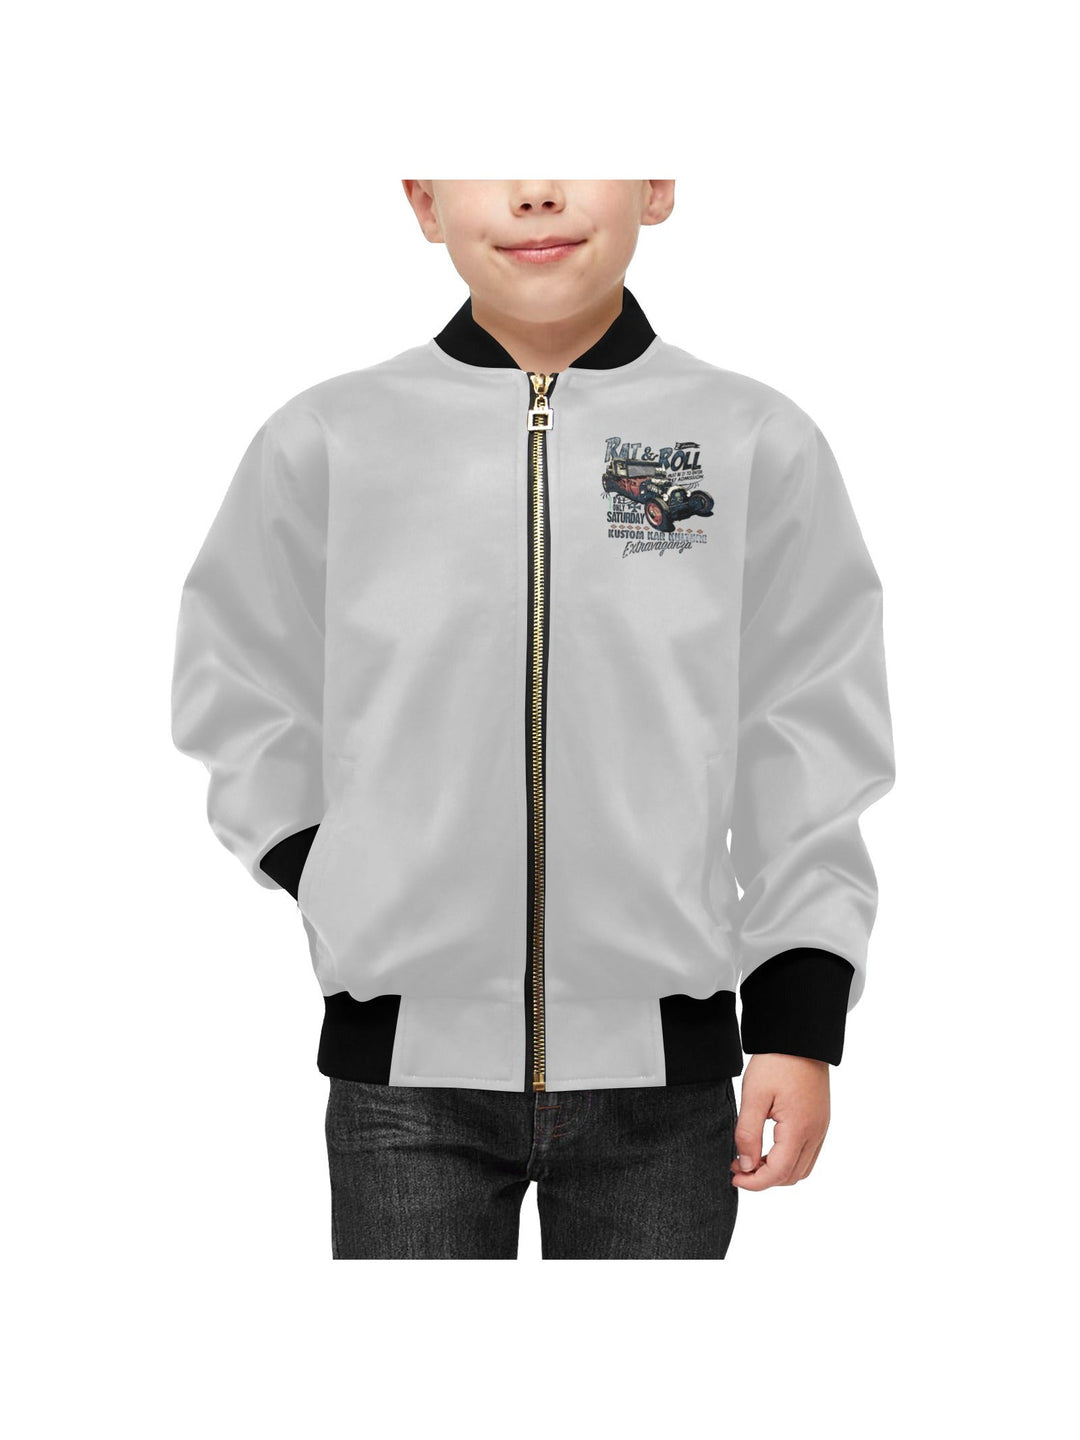 Rat & Roll Kid's Bomber Jacket With Pockets